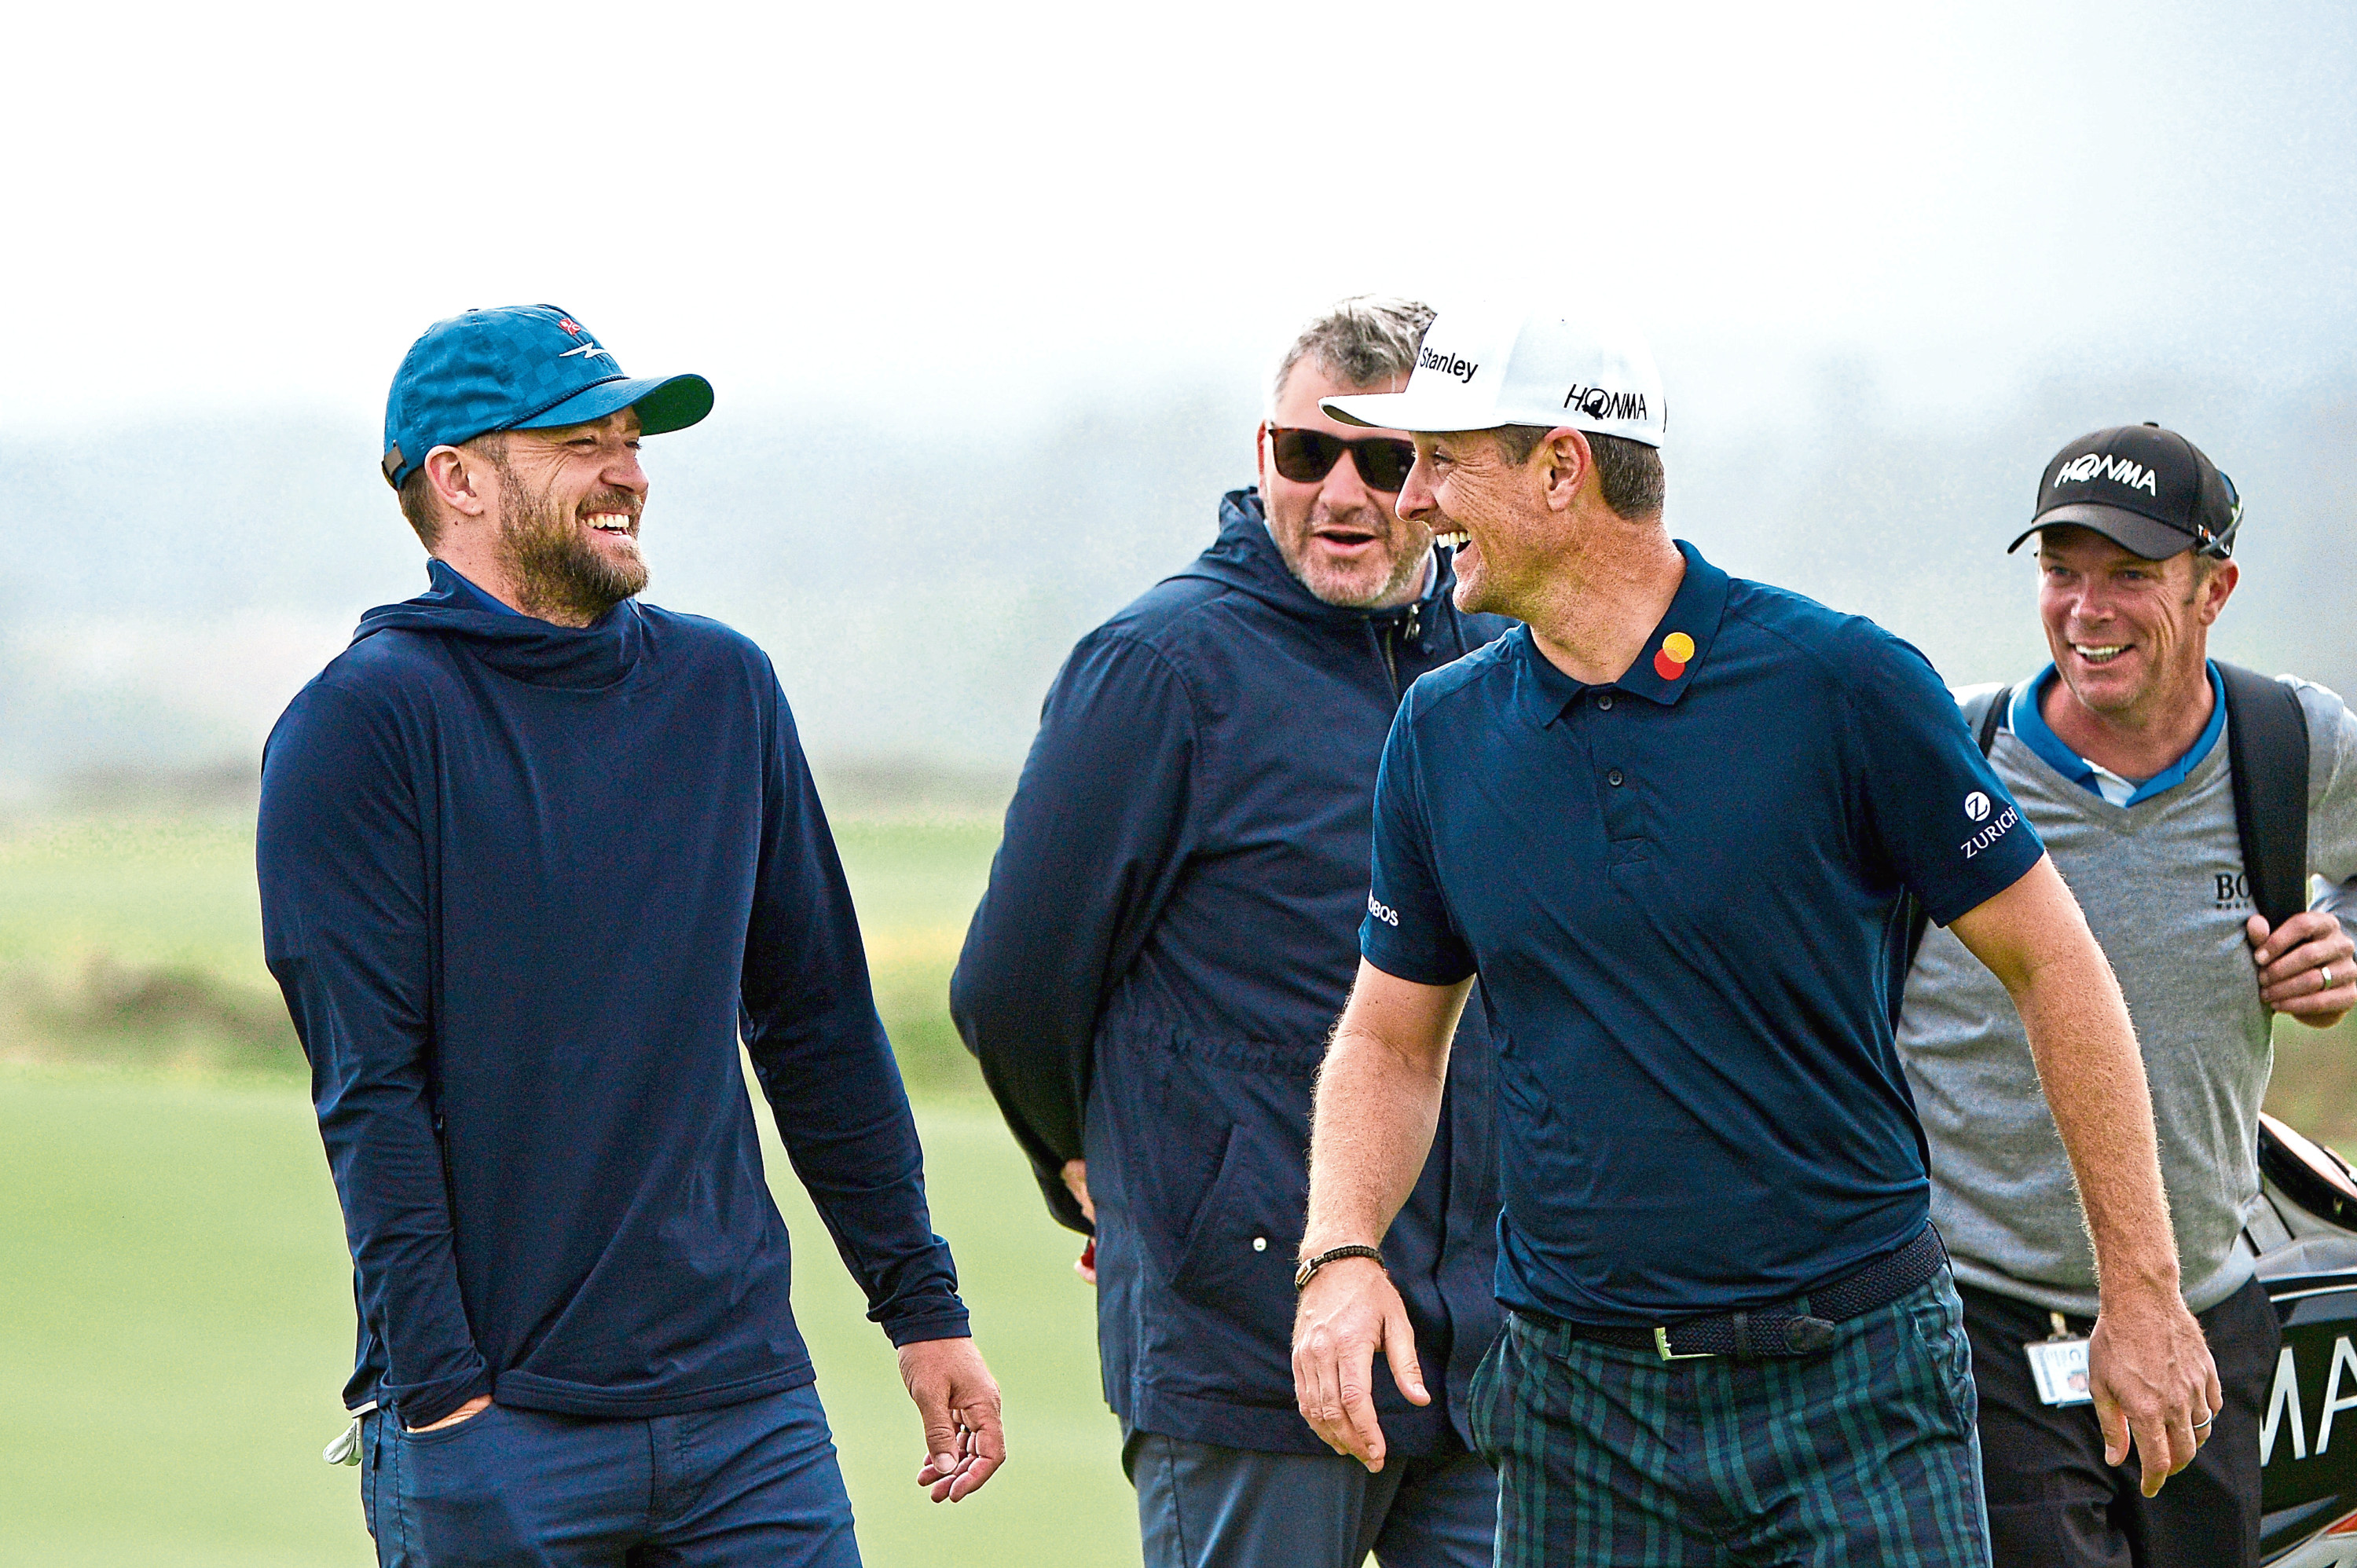 Justin Rose stands with musician, Justin Timberlake as they share a joke on the fifth green during previews for the Alfred Dunhill Links Championship at The Old Course. (Photo by Mark Runnacles/Getty Images)